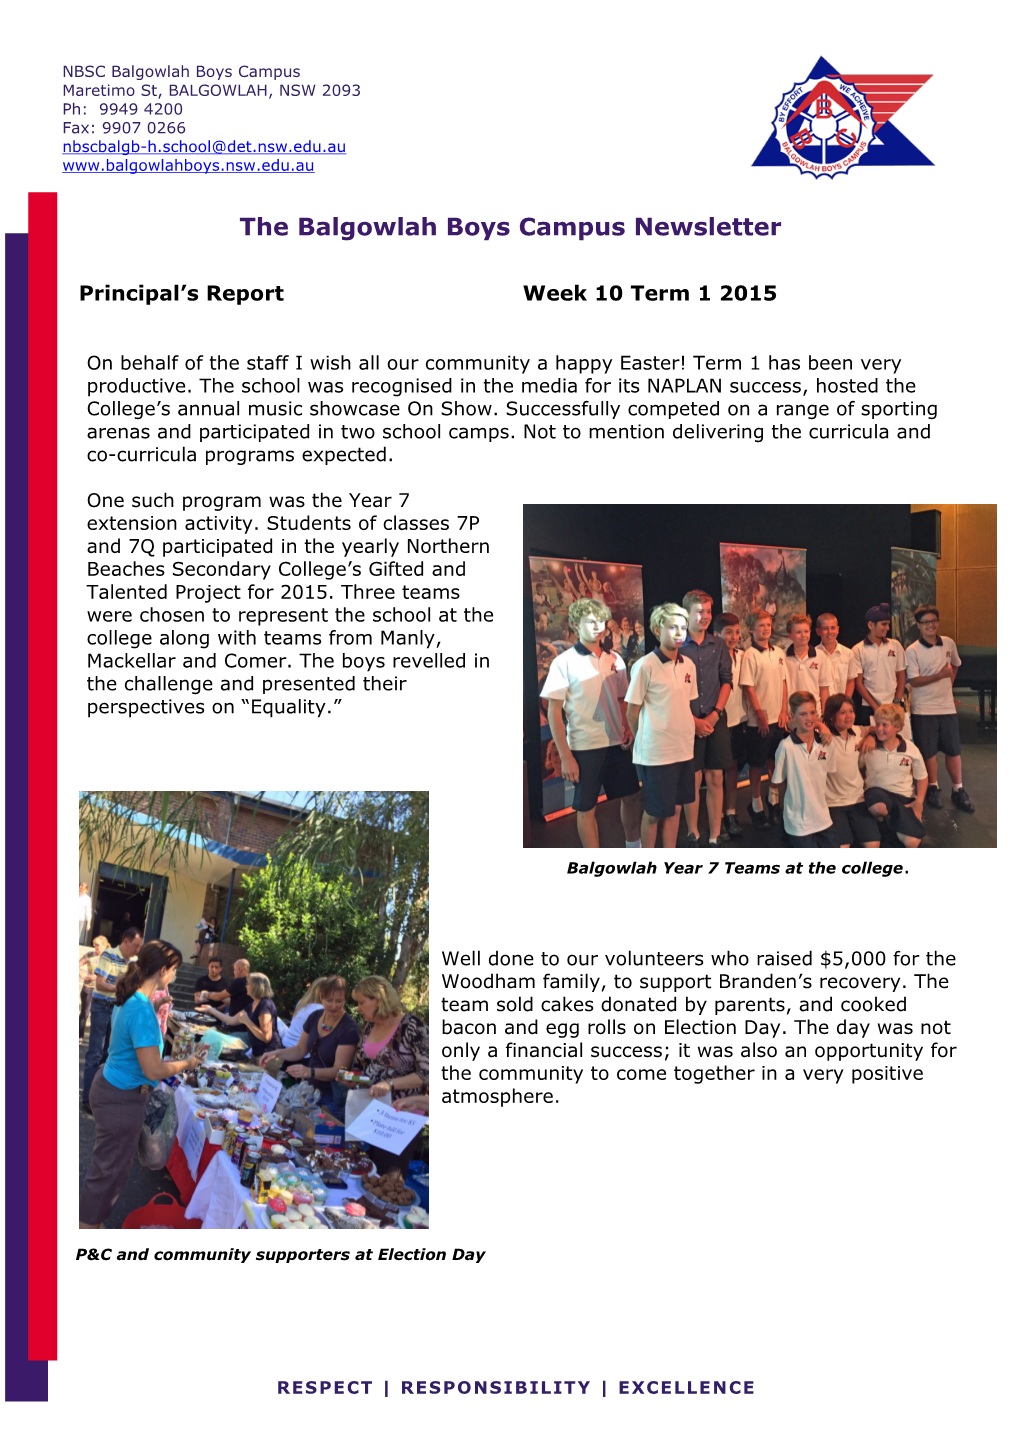 The Balgowlah Boys Campus Newsletter